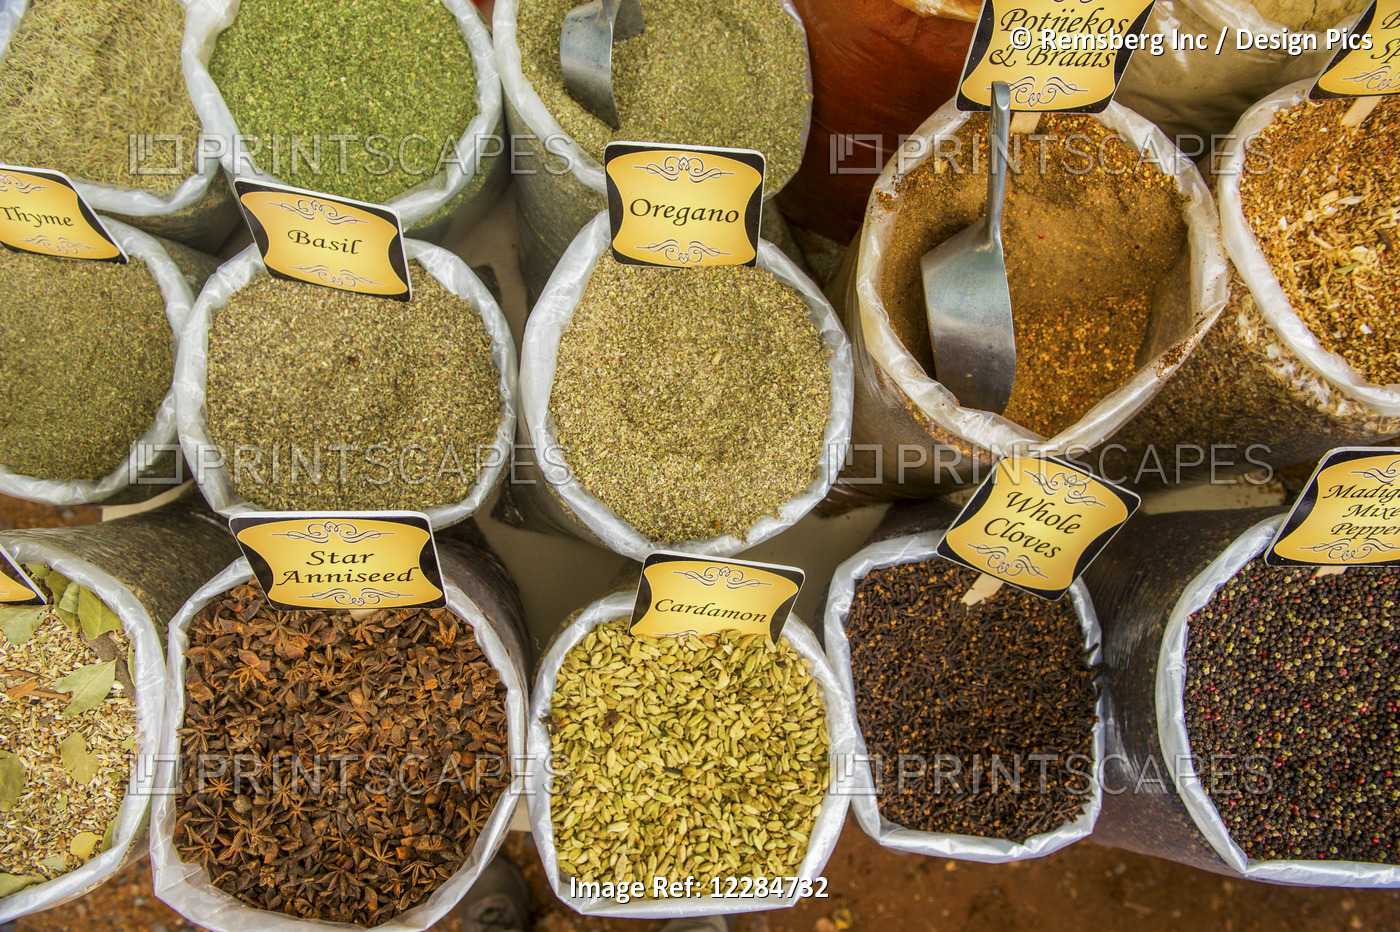 Herbs And Spices For Sale At Farmers Market; Pretoria, Gauteng, South Africa